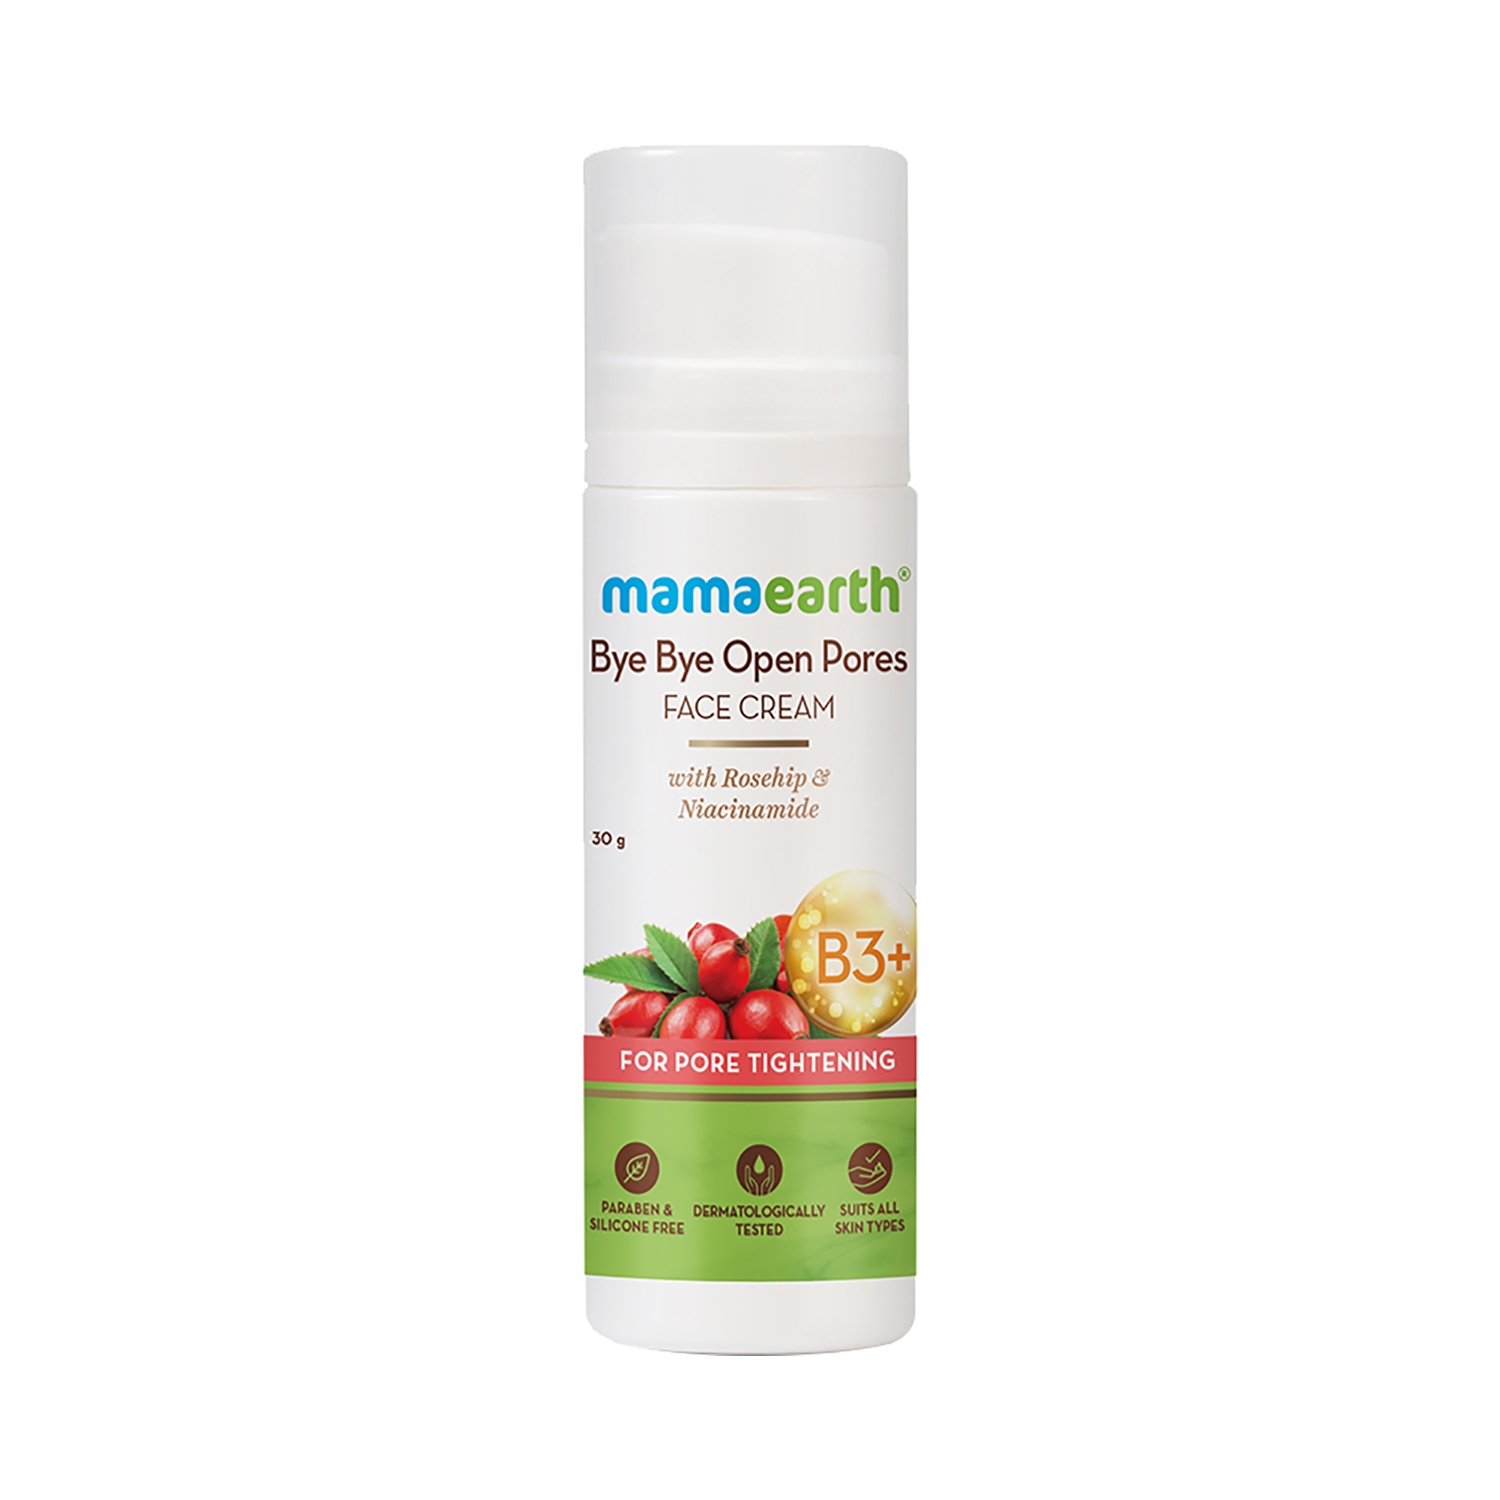 Mamaearth | Mamaearth Bye Bye Face Cream For Pore Tightening With Rosehip & Niacinamide (30g)